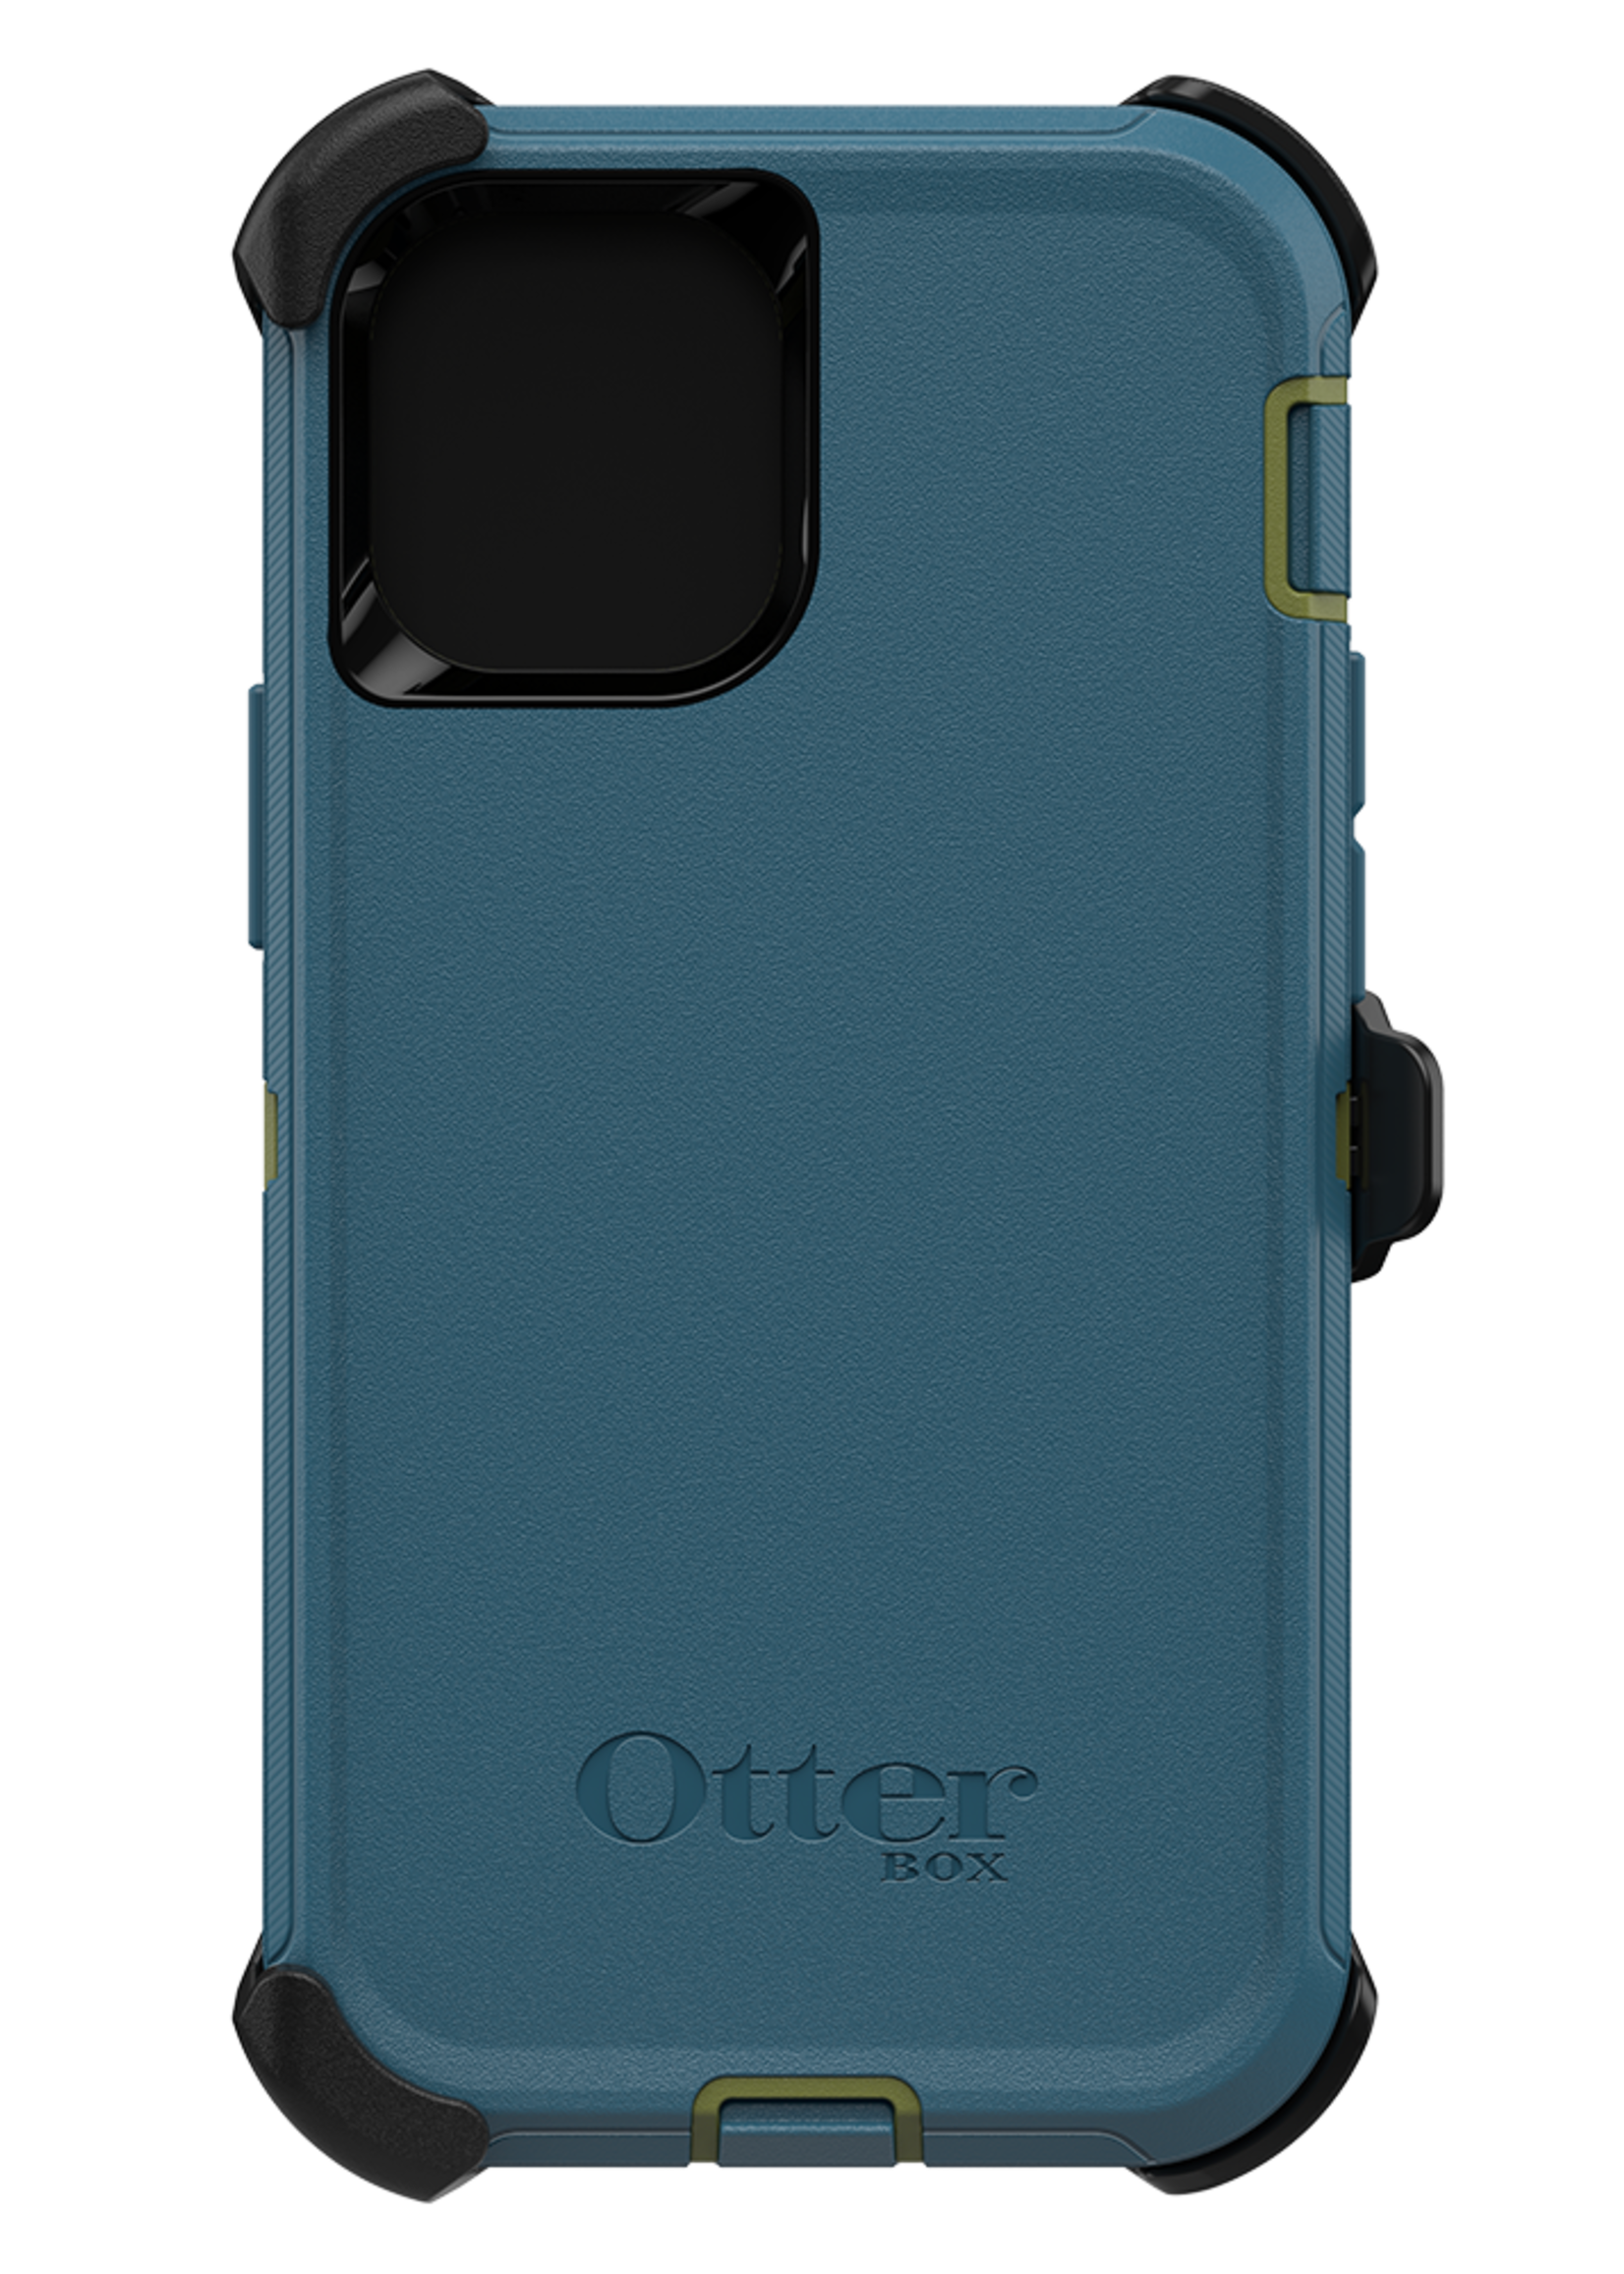 Otterbox OtterBox - Defender Case for Apple iPhone 12 mini - Teal Me About It